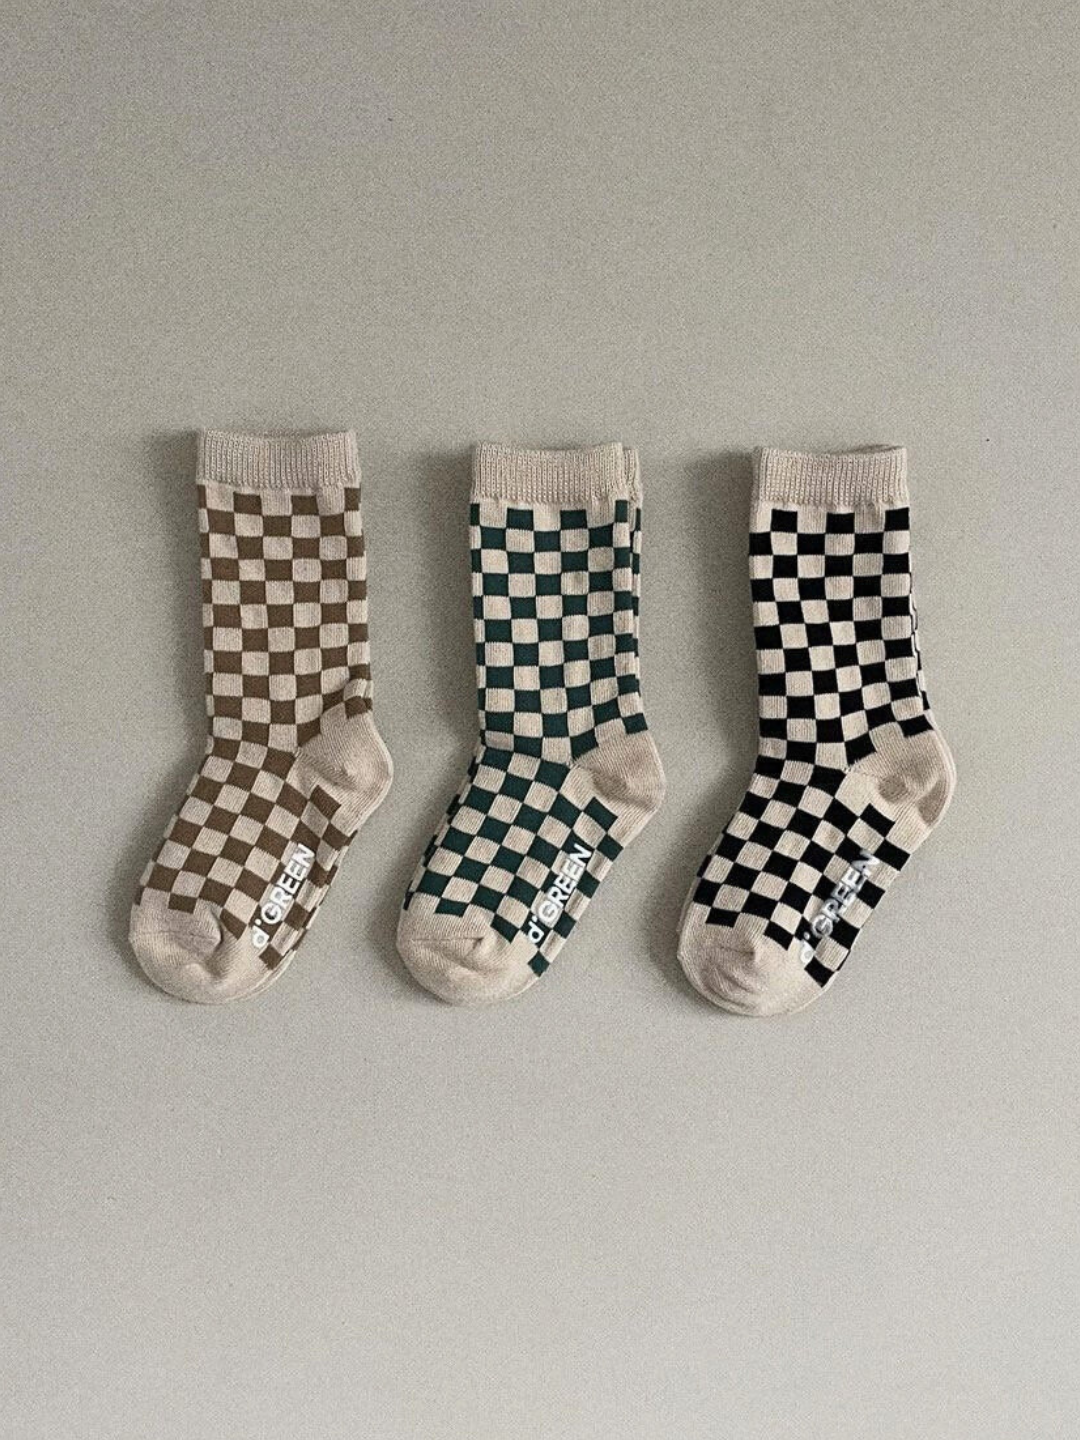 Set of three pairs of kids' checkerboard socks, in light brown, forest green, and black on an ecru background